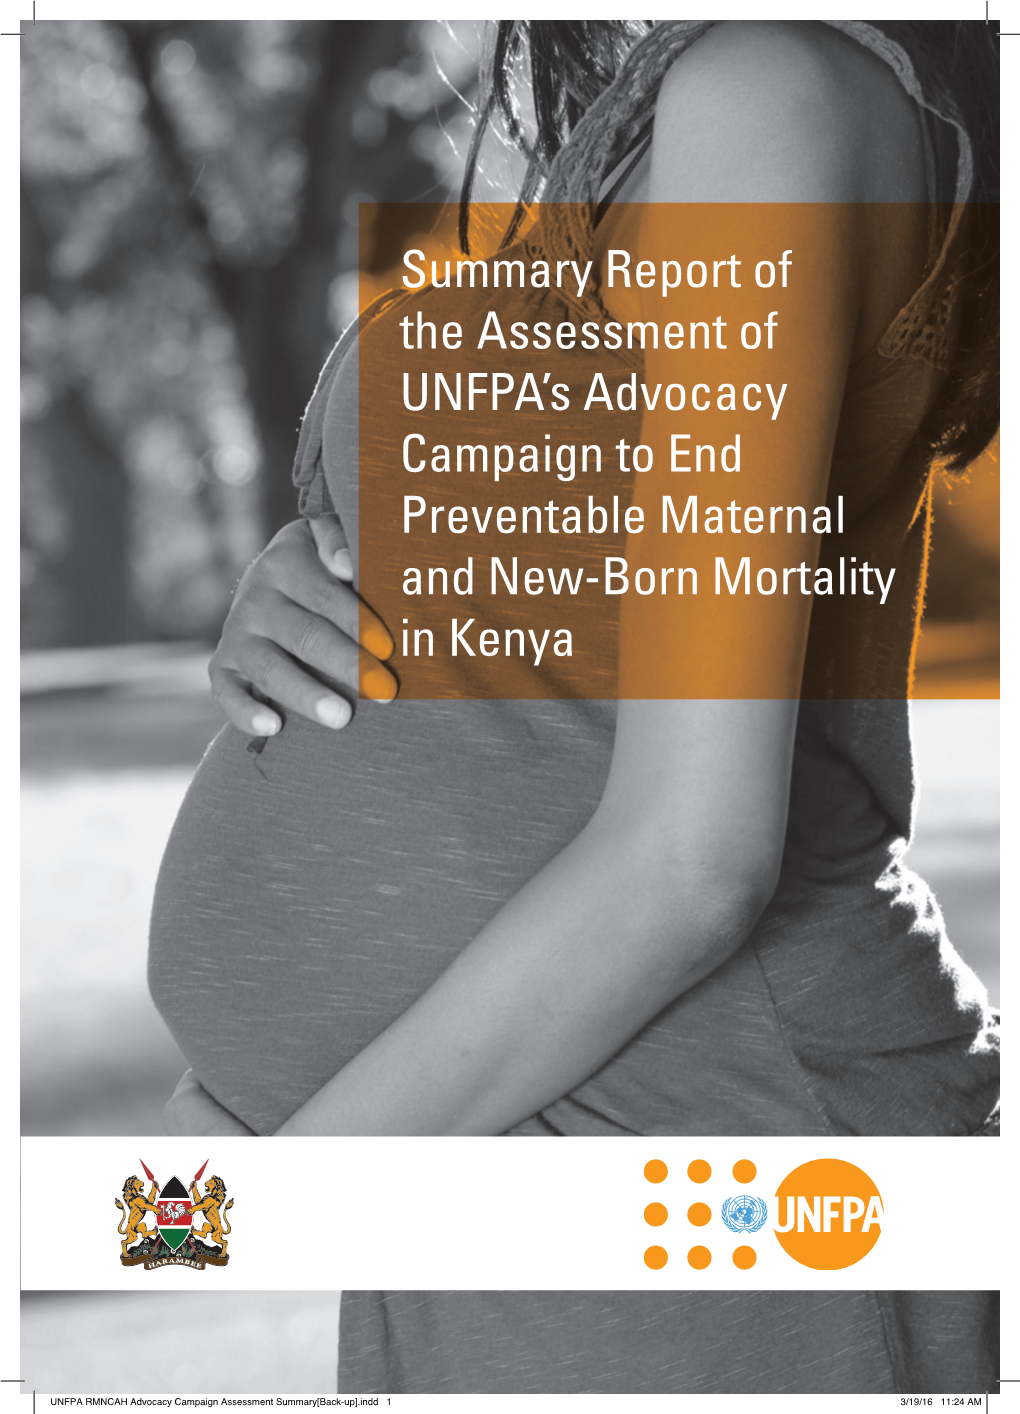 Summary Report of the Assessment of UNFPA's Advocacy Campaign To